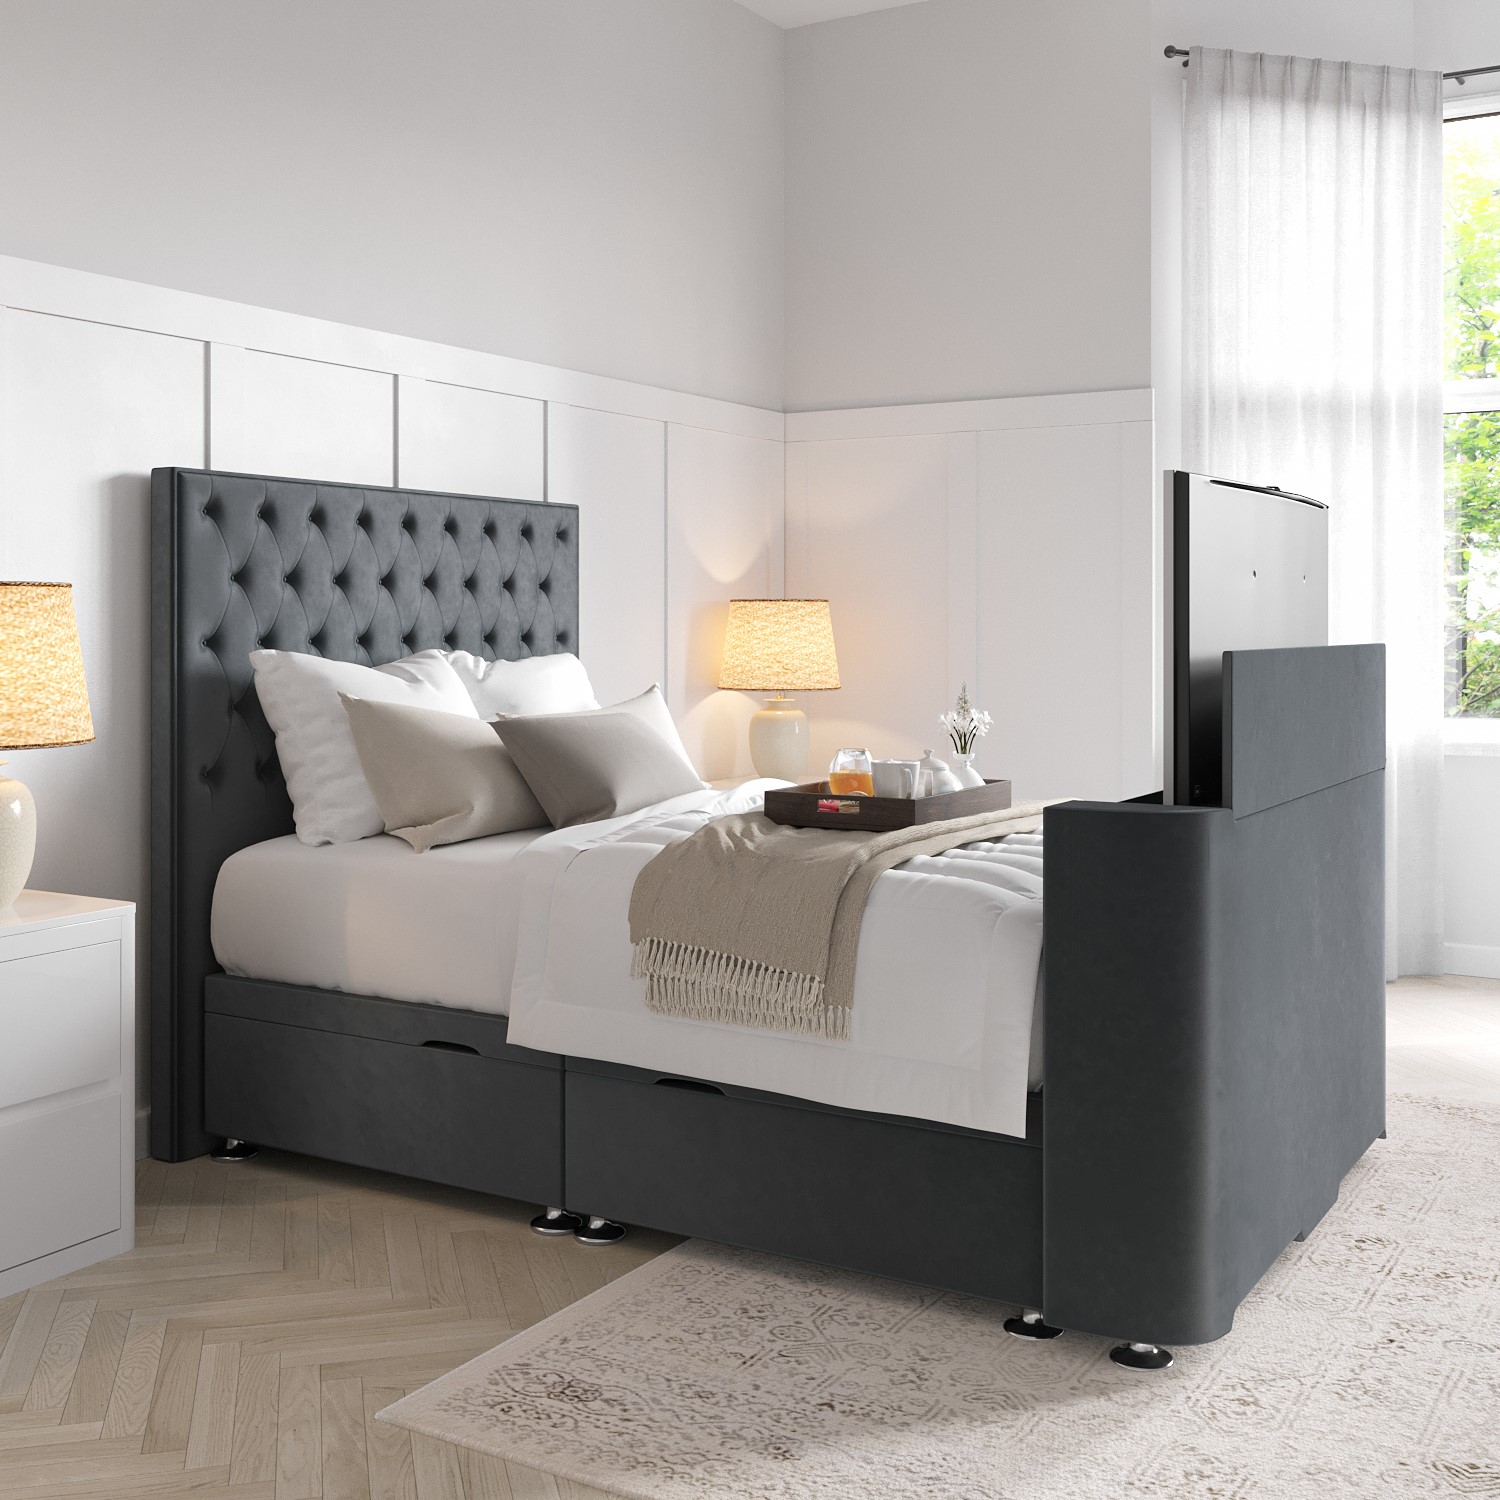 Photo of Double tv bed in grey velvet with chesterfield headboard - avery